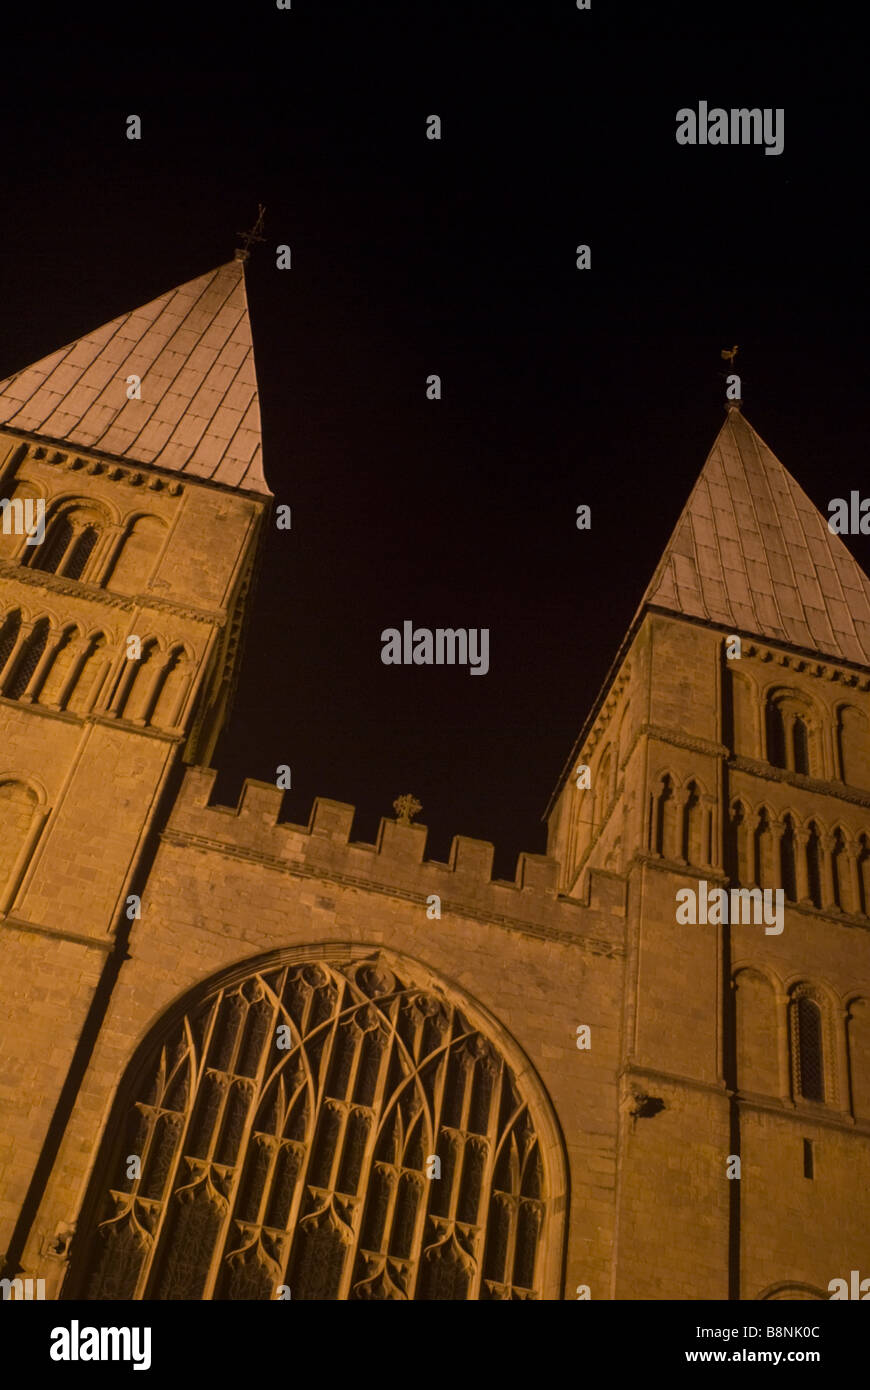 The towers of Southwell Minster at night Stock Photo